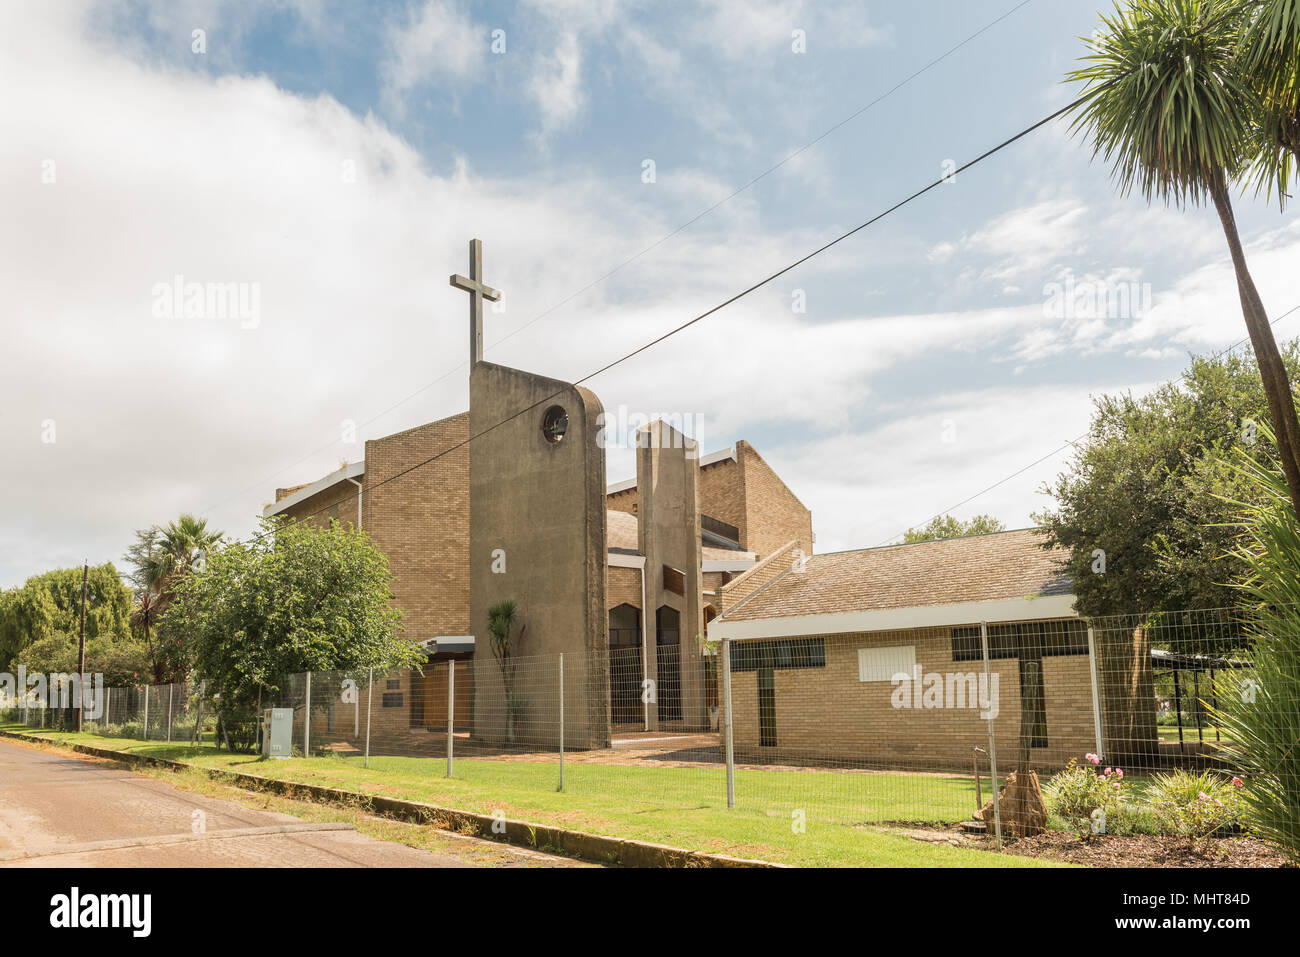 BERGVILLE, SOUTH AFRICA - MARCH 18, 2018: The Dutch Reformed Church in Bergville in the Kwazulu-Natal Province Stock Photo